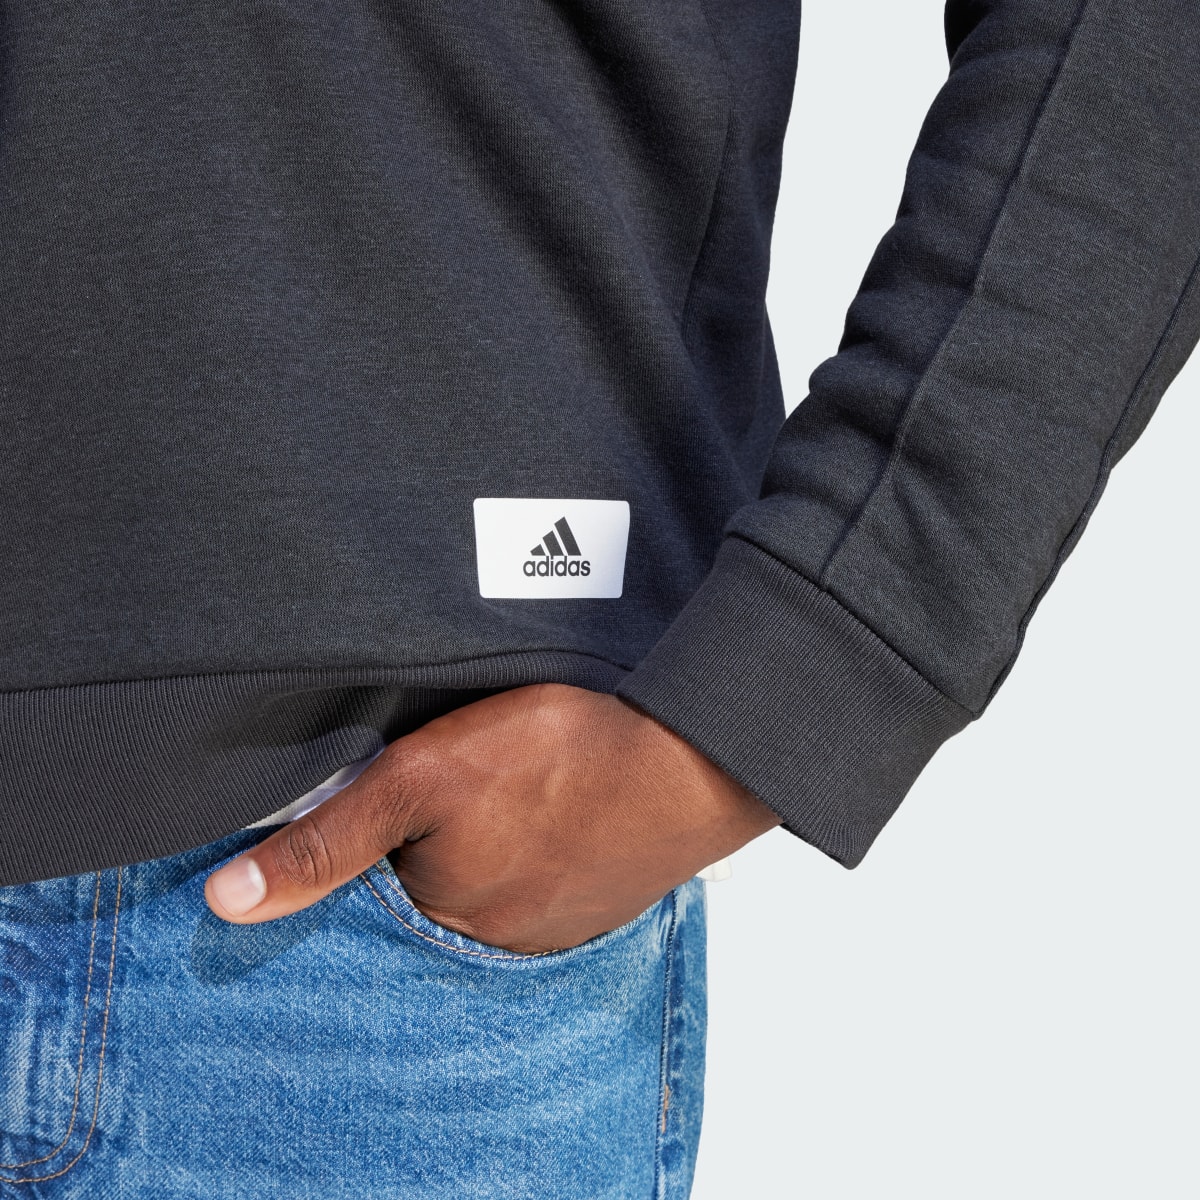 Adidas The Safe Place Hoodie. 6